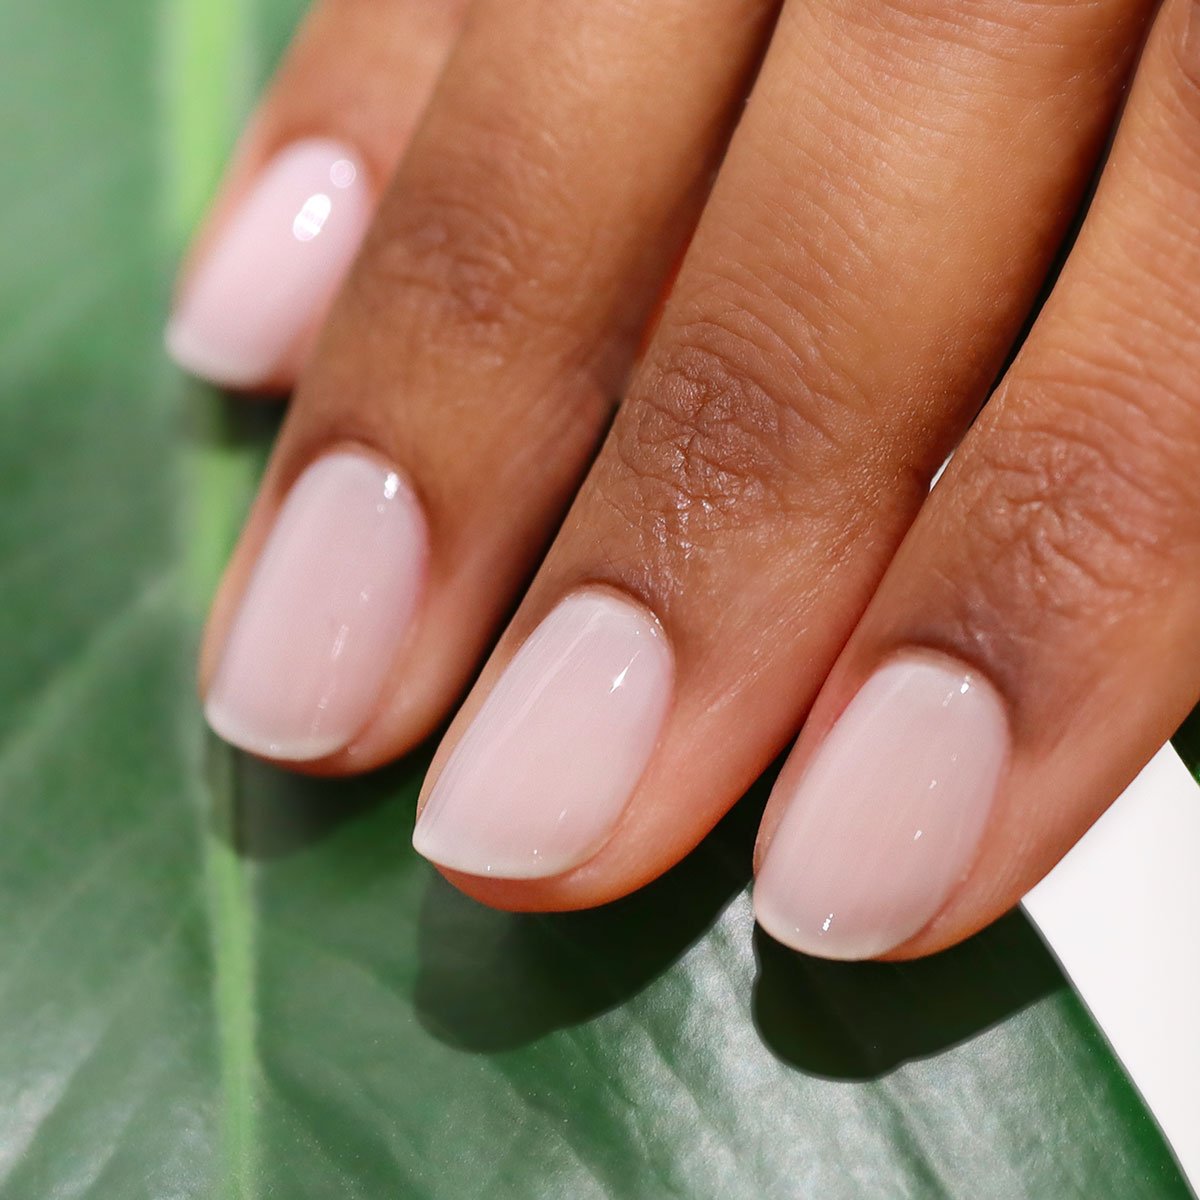 Strawberry Milk Nails Are The Pastel Pink Manicure Trend That's Perfect For  Spring